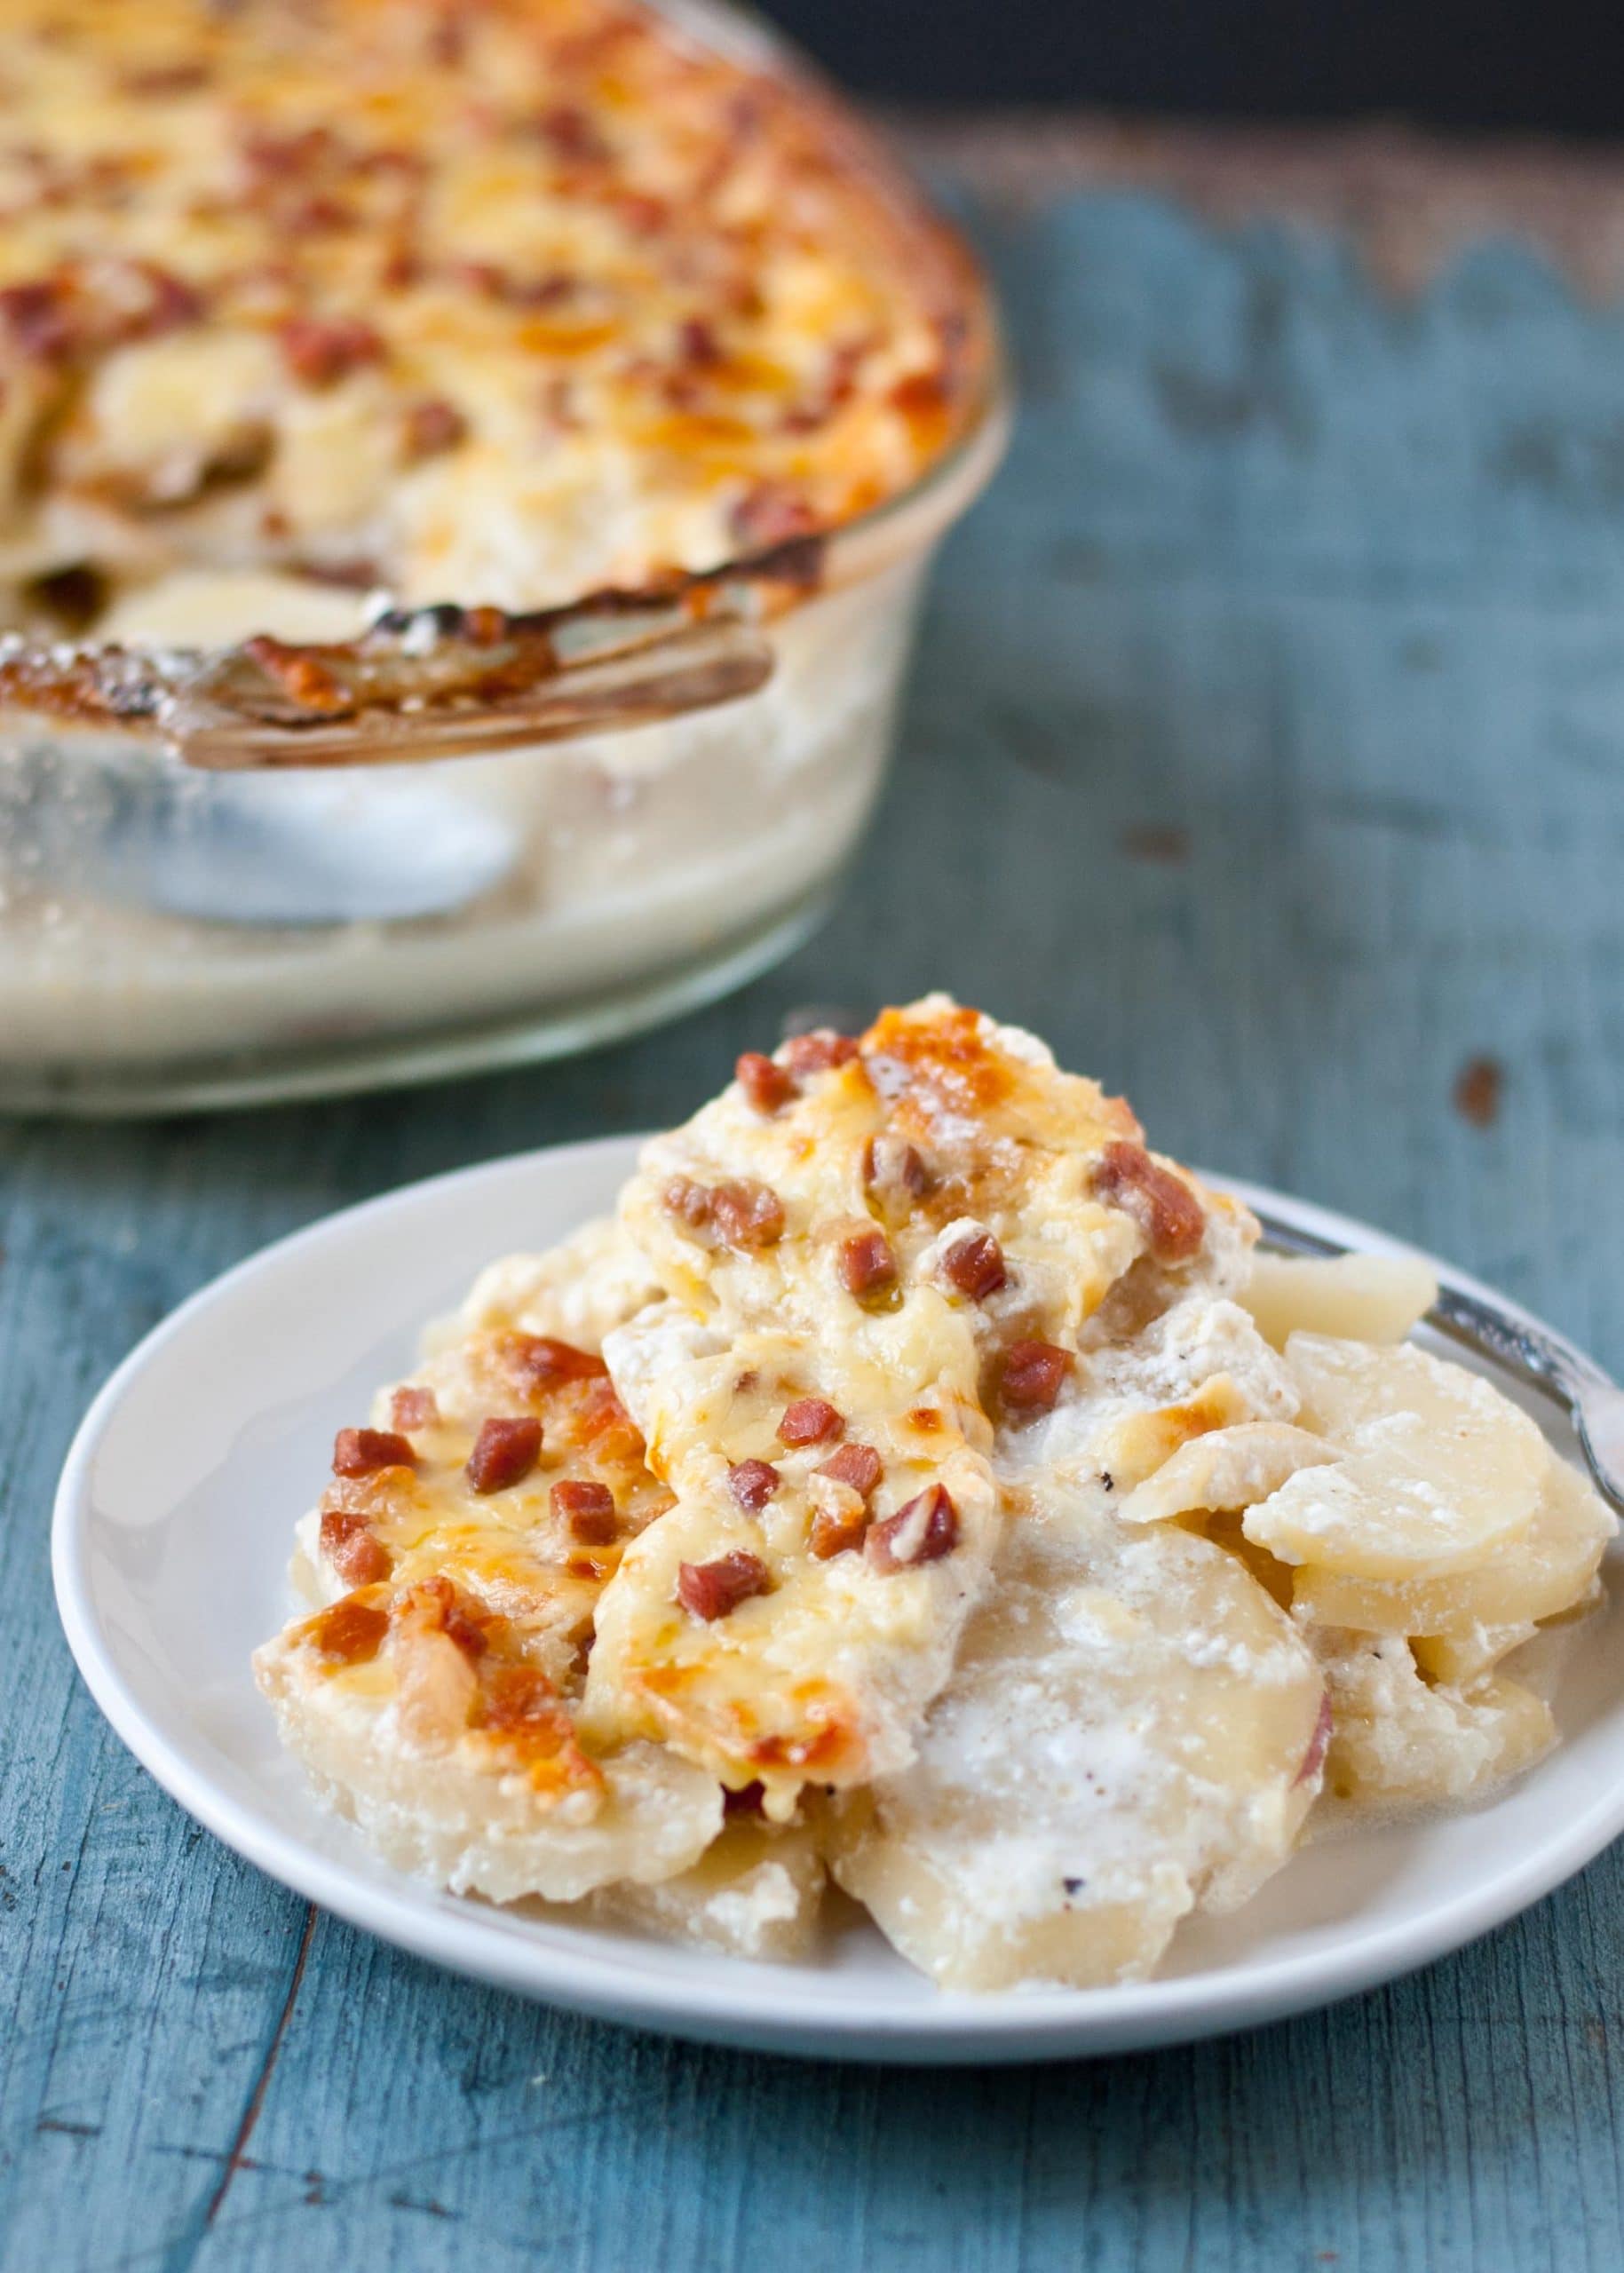 Potatoes and Apples Au Gratin with Skellig Cheddar Cheese | Neighborfoodblog.com